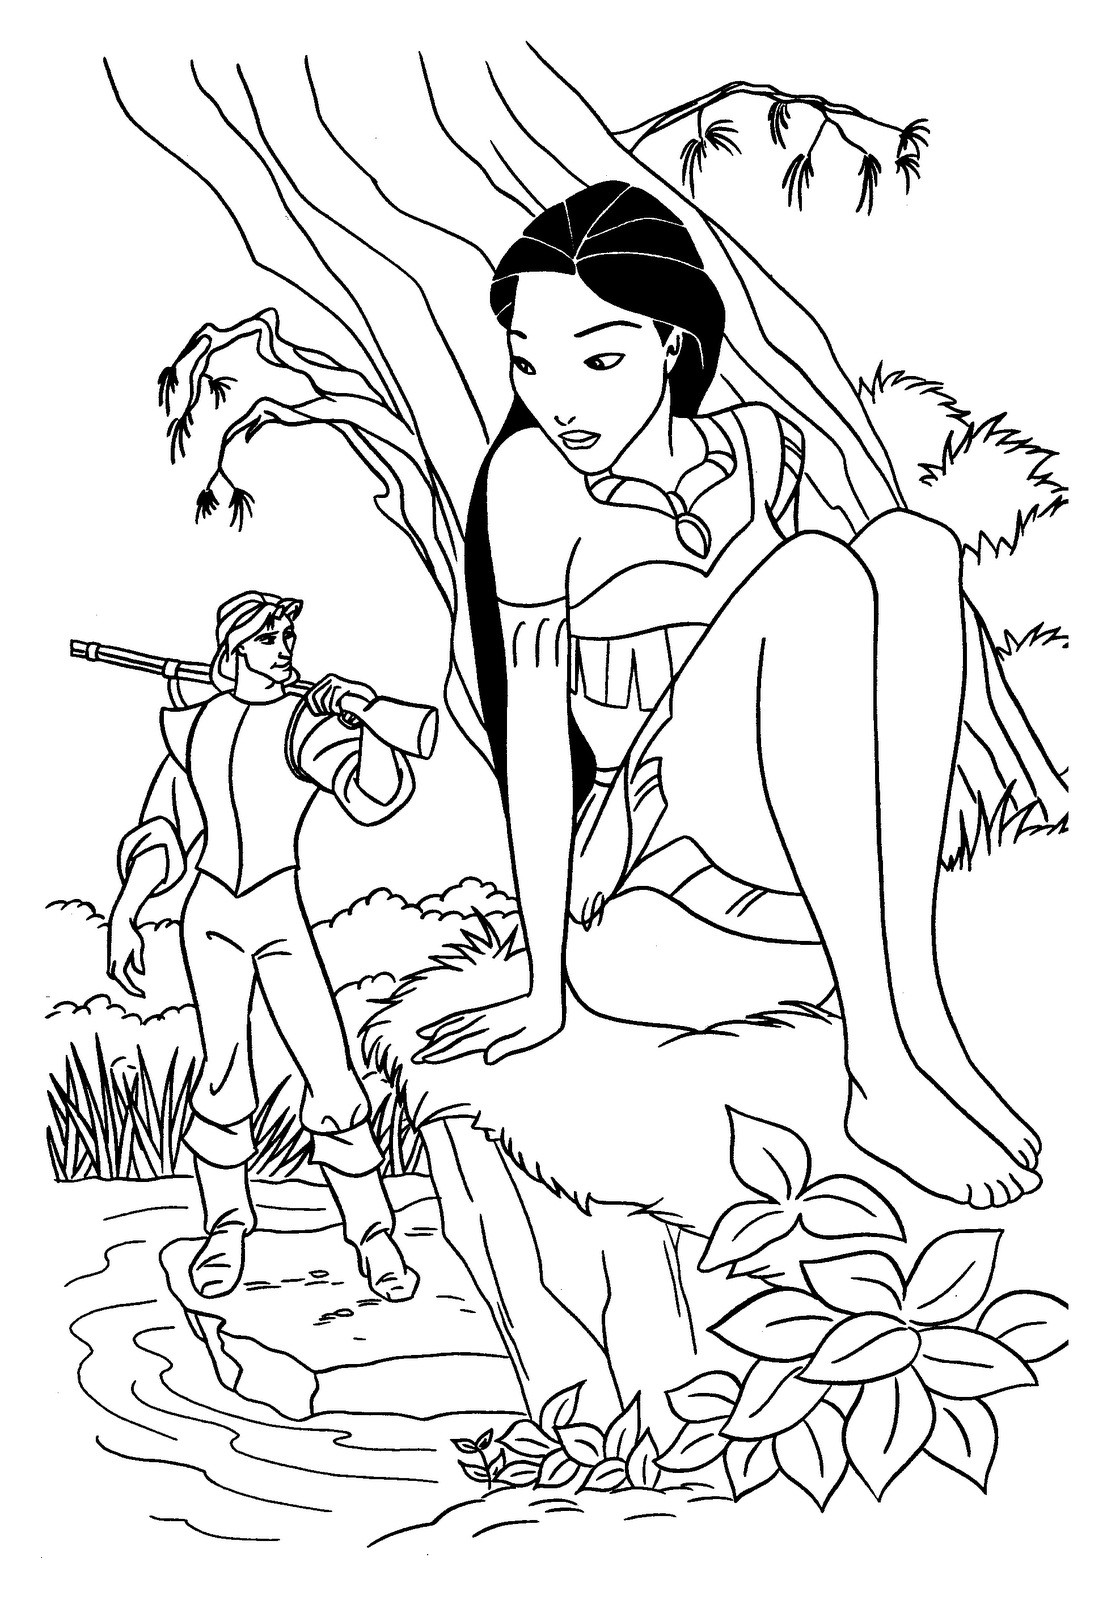 Disney Coloring Pages Pocahontas Awesome Disney Coloring Pages Pocahontas